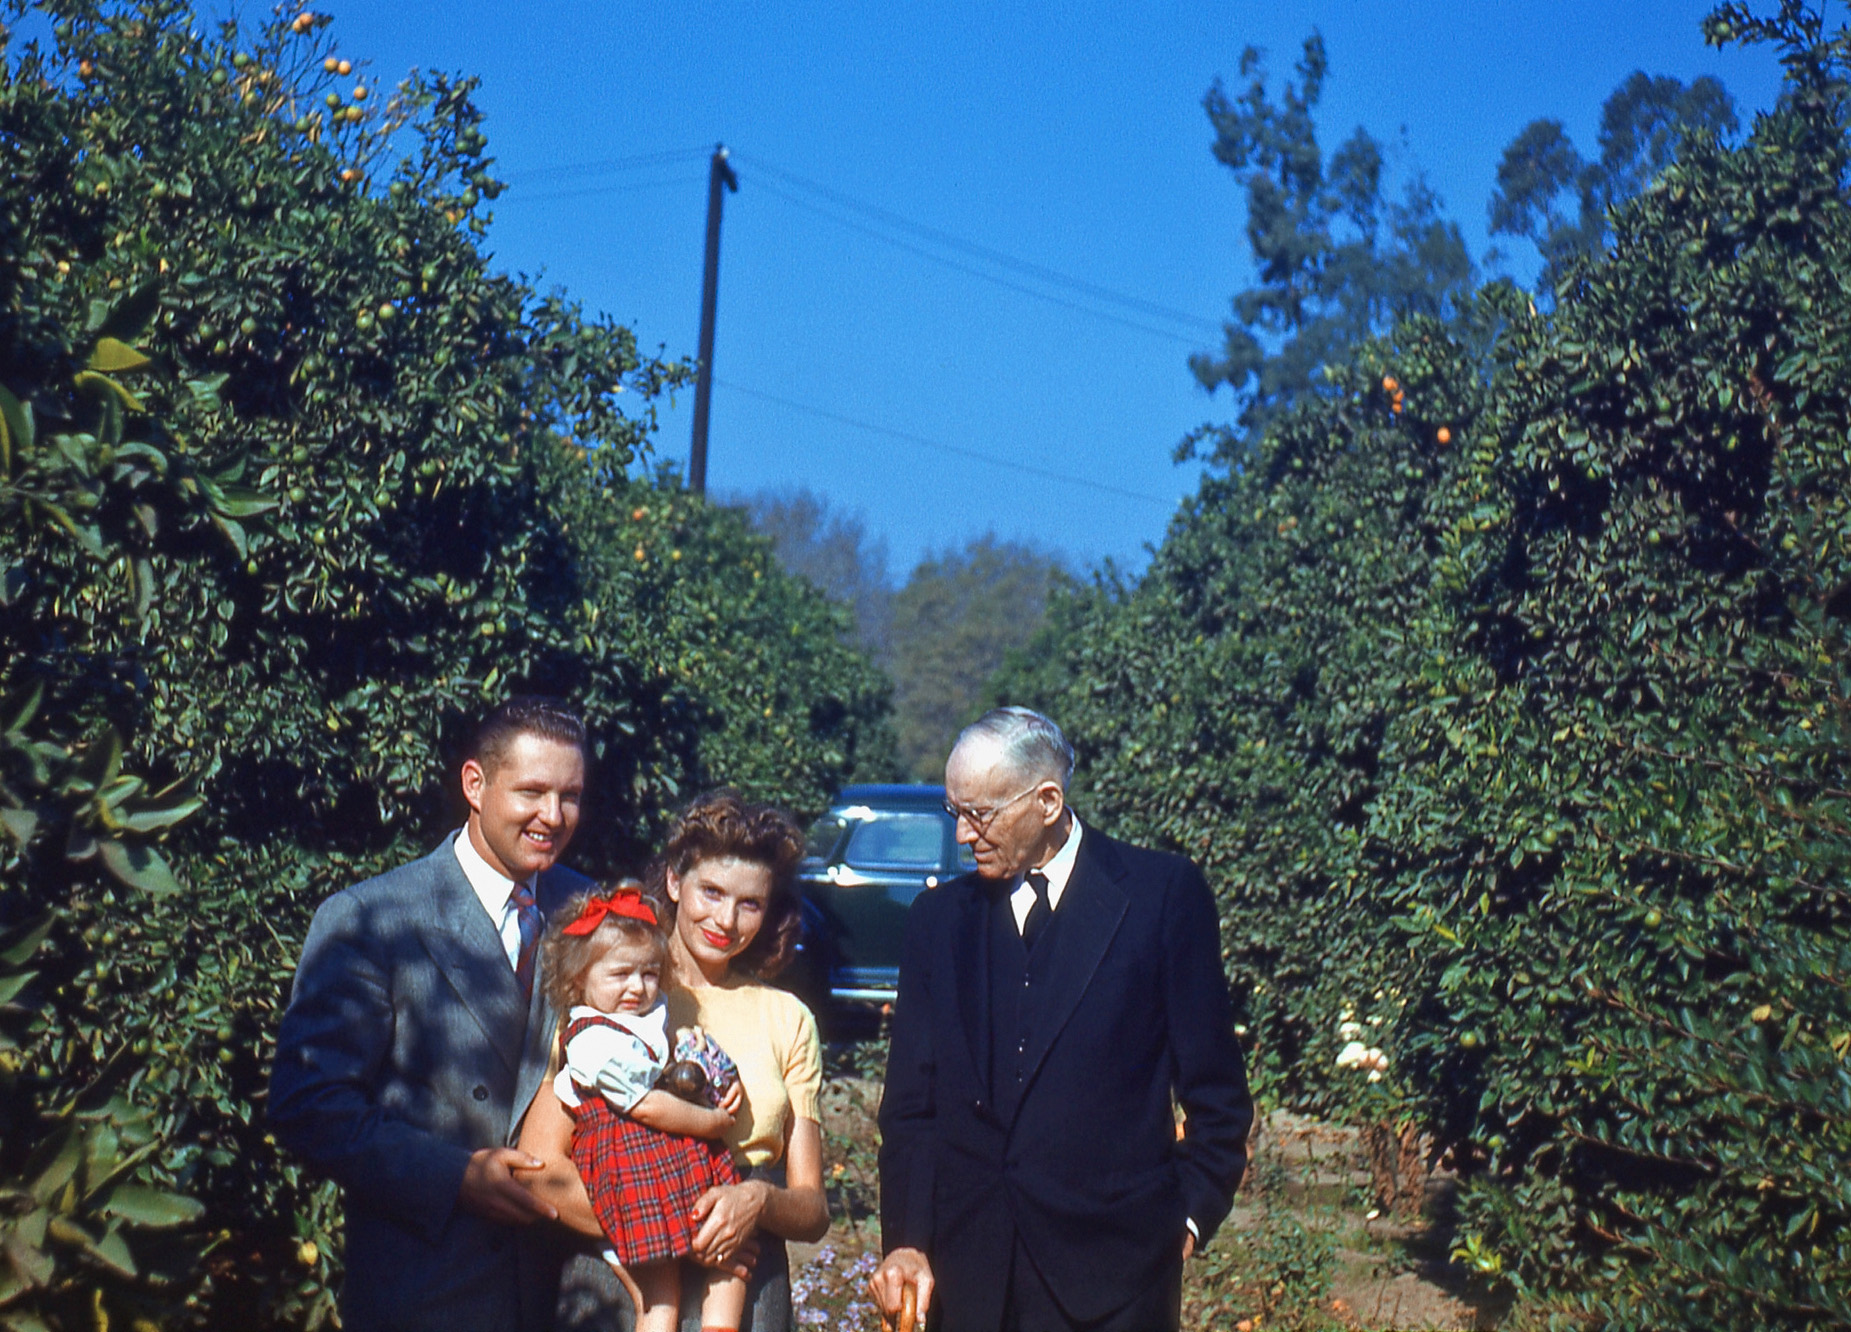 This was taken in an orange grove so it's likely in Southern California where I found this Kodachrome slide in a thrift store. Now instead of actual citrus groves, we have shopping centers named after citrus groves. The slide is captioned "Uncle Albert Thanksgiving 1948." View full size.